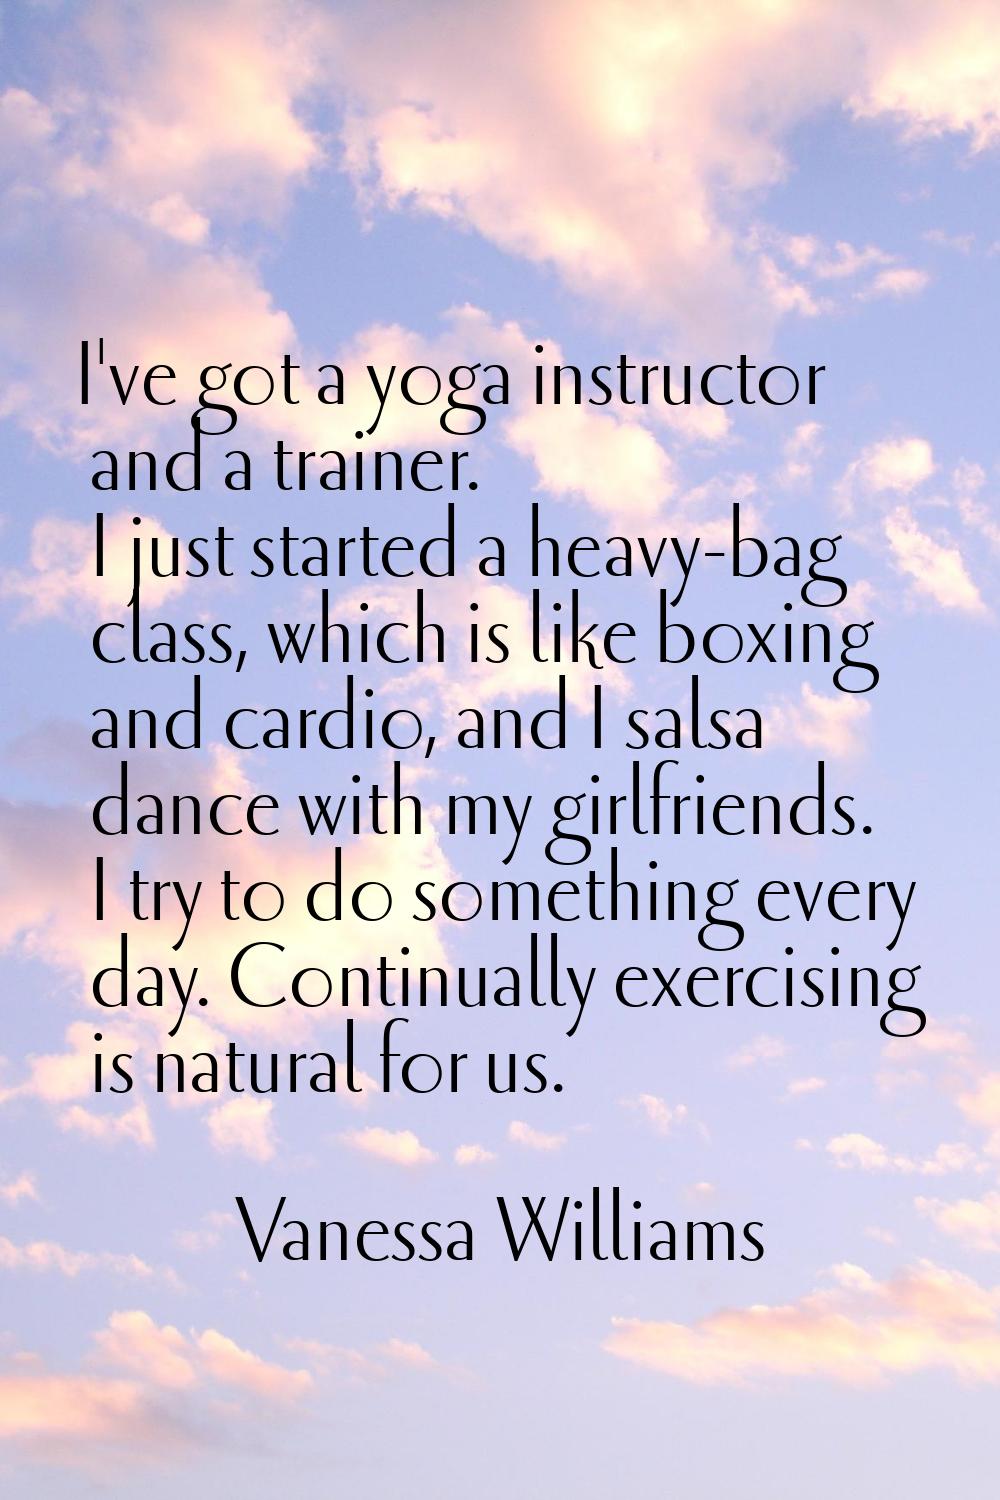 I've got a yoga instructor and a trainer. I just started a heavy-bag class, which is like boxing an